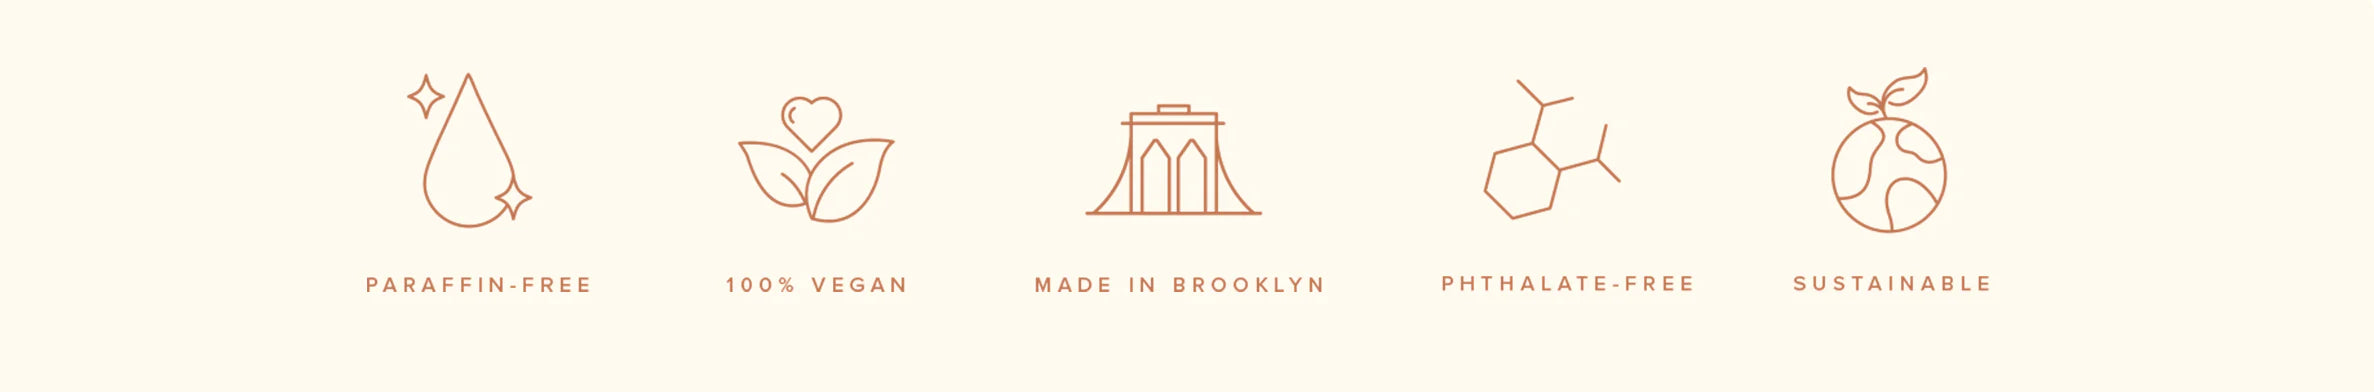 Brooklyn Candle Studio - web icons - Paraffin free - 100 percent vegan - made in brooklyn - phthalate free - sustainable